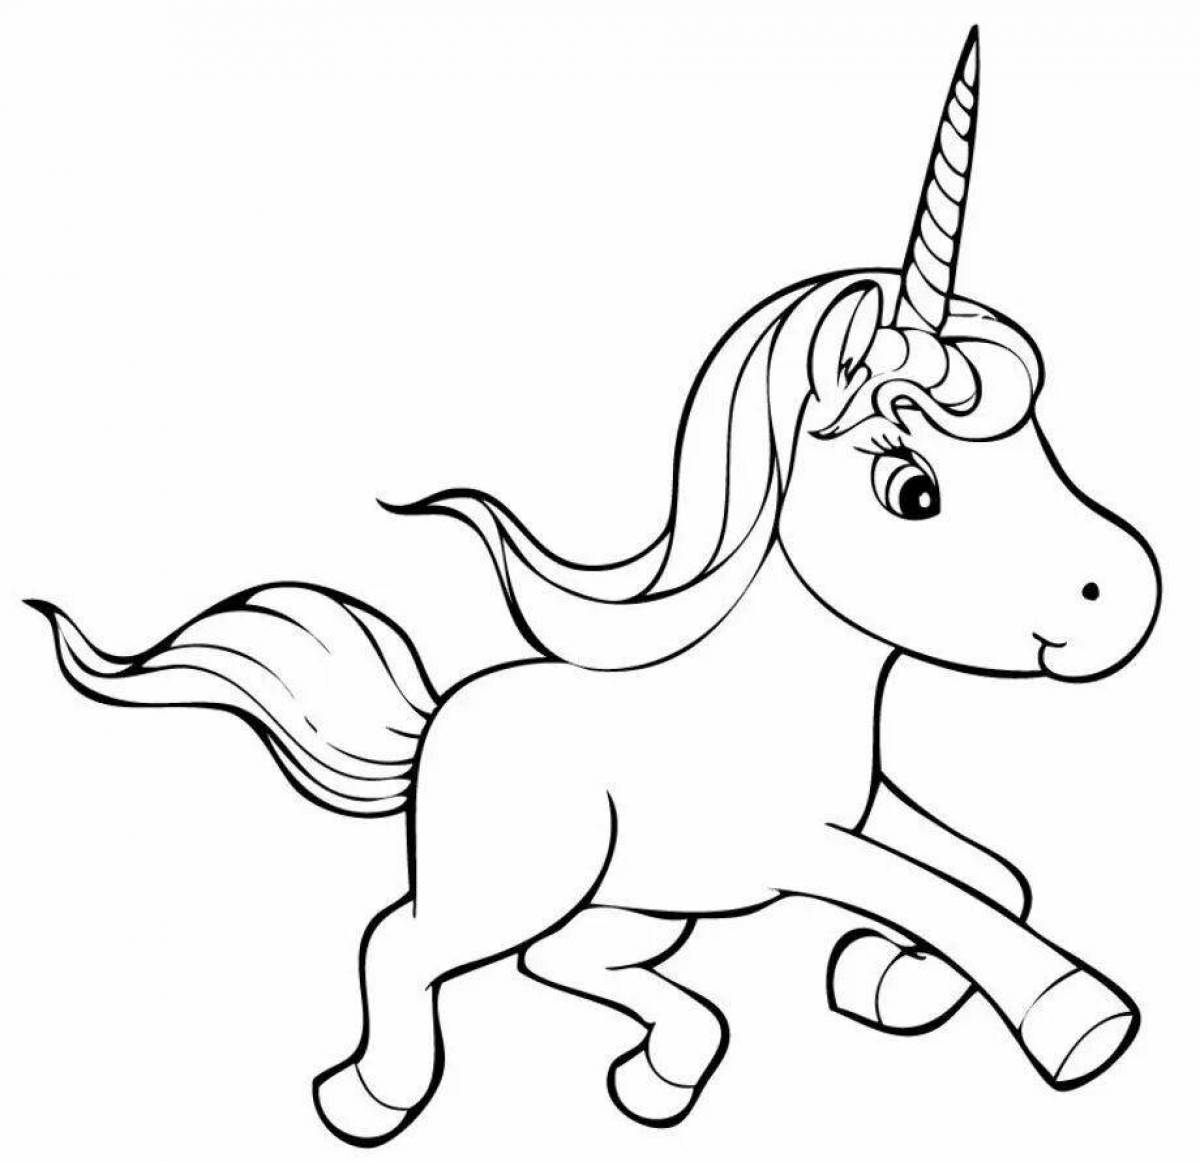 Coloring unicorn drawing for kids